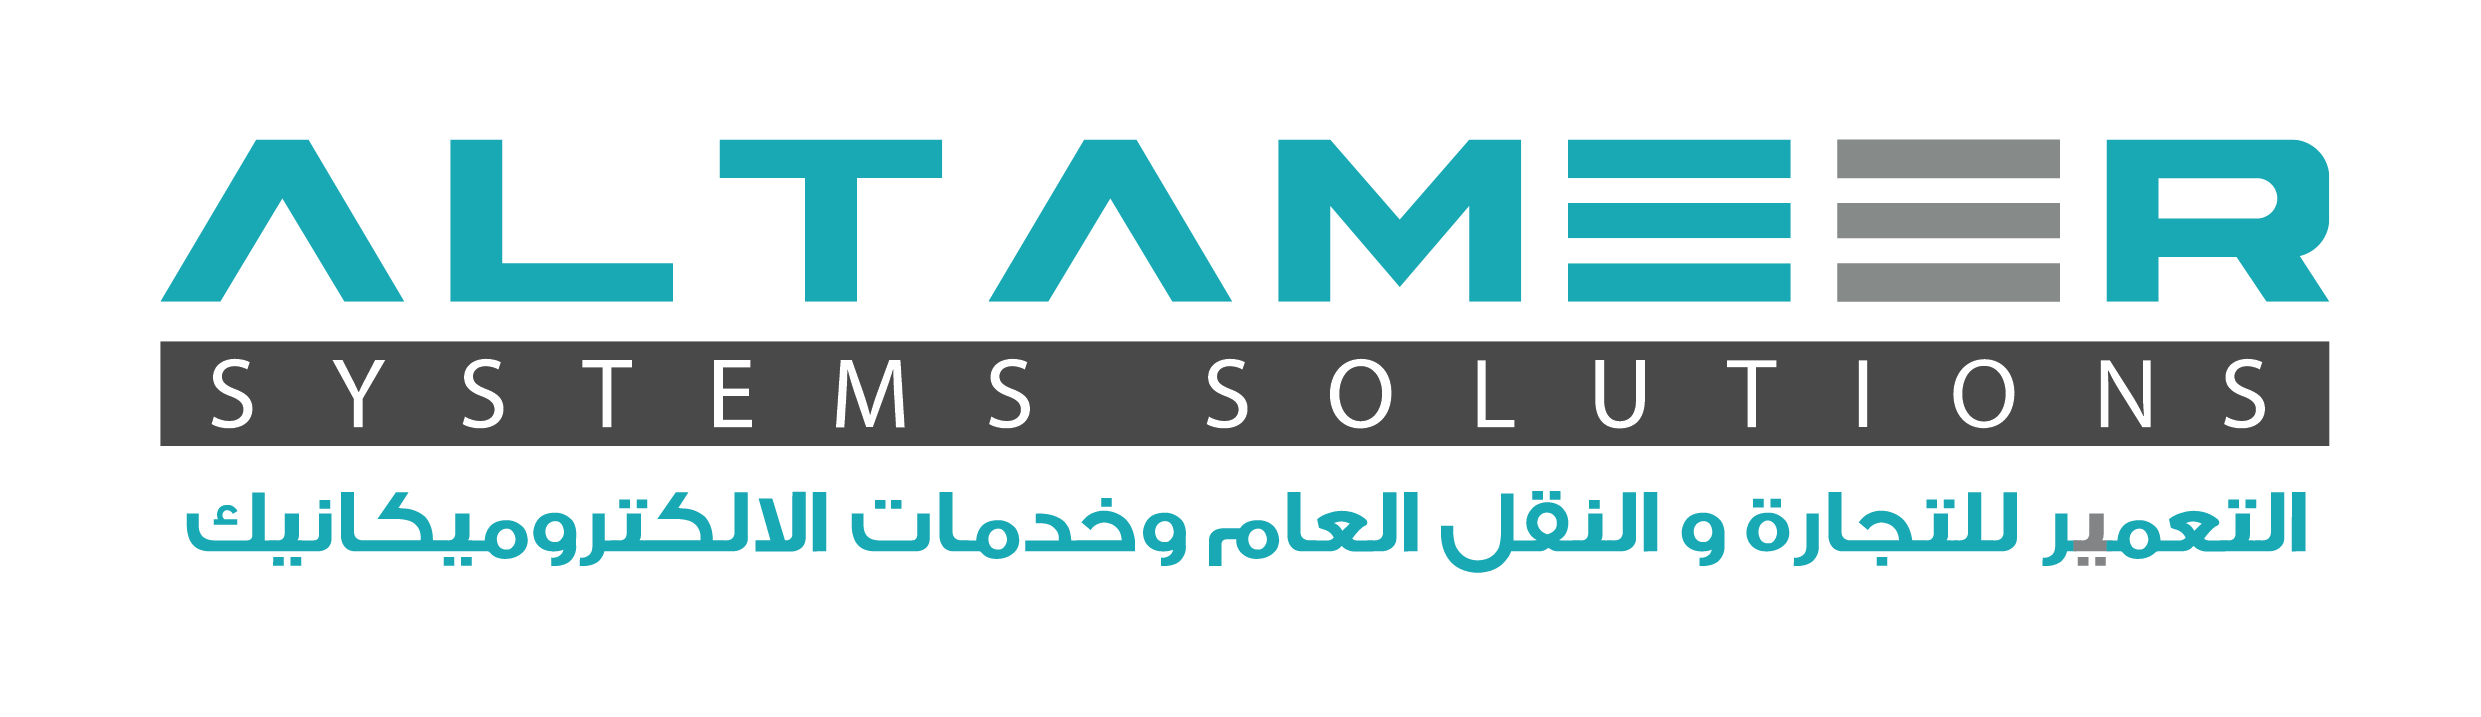 ALTAMEER Systems Solutions